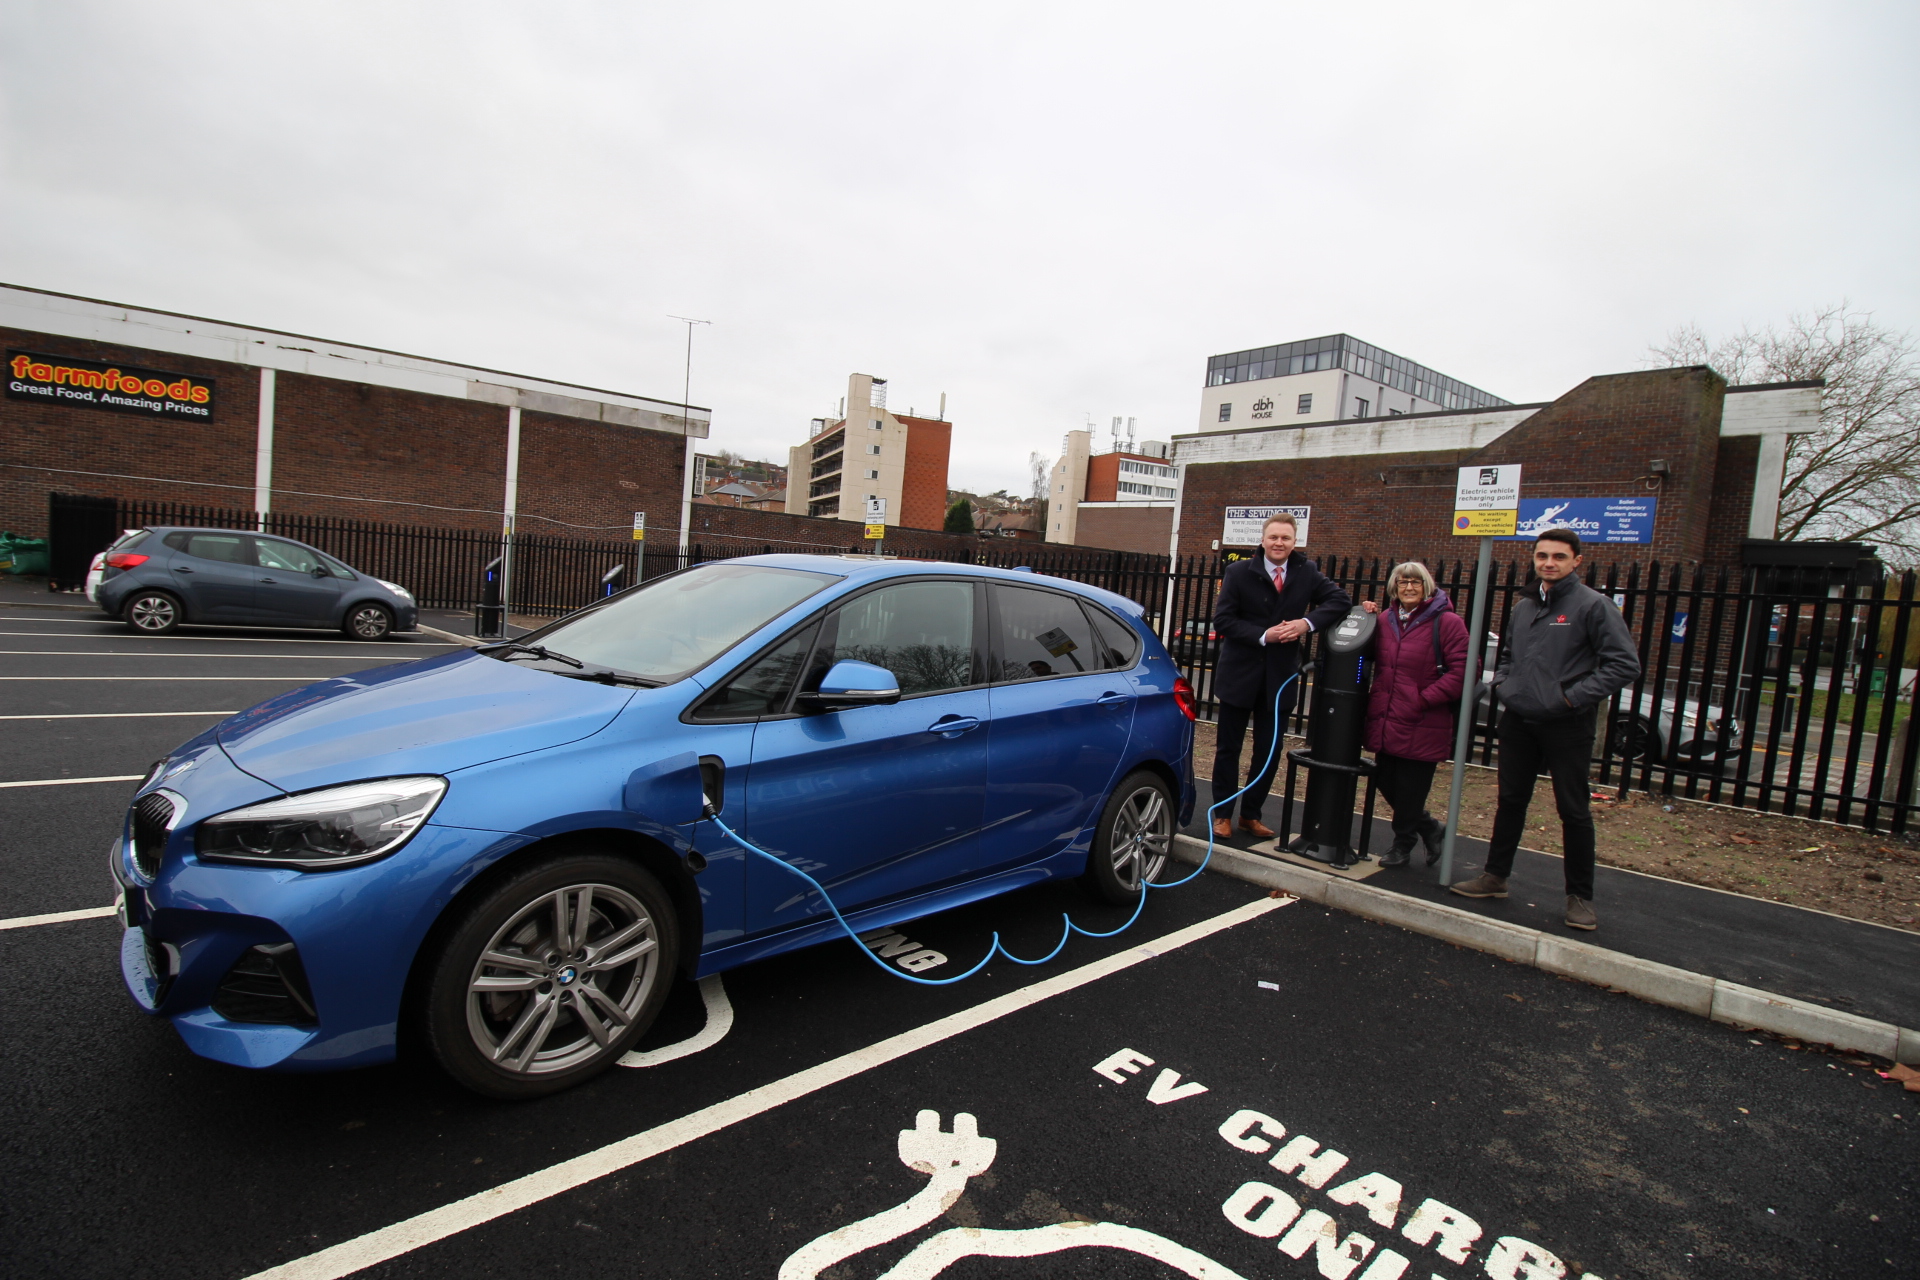 A blue hybrid car parked in an Electic Charge Point with Councillor Michael Payne, Councillor Jenny Hollingsworth and representative from MG LTD